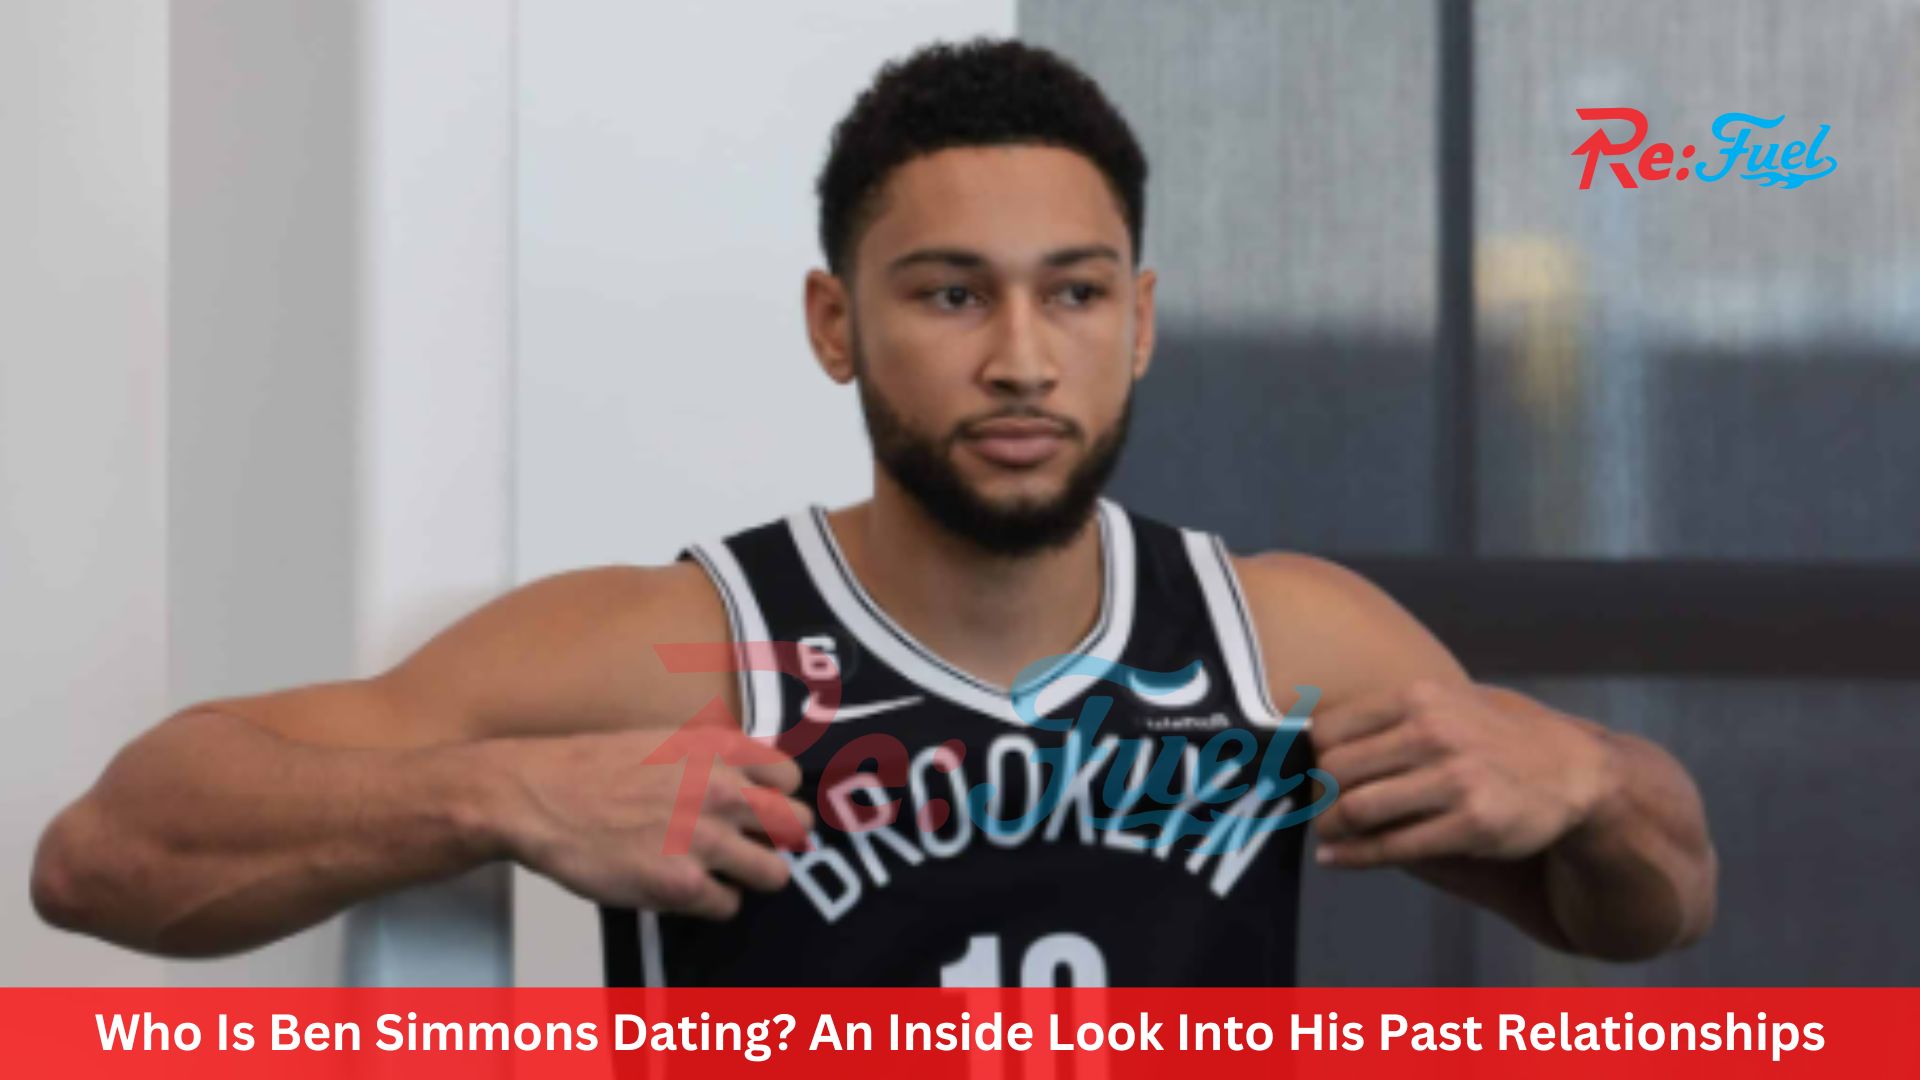 Who Is Ben Simmons Dating? An Inside Look Into His Past Relationships